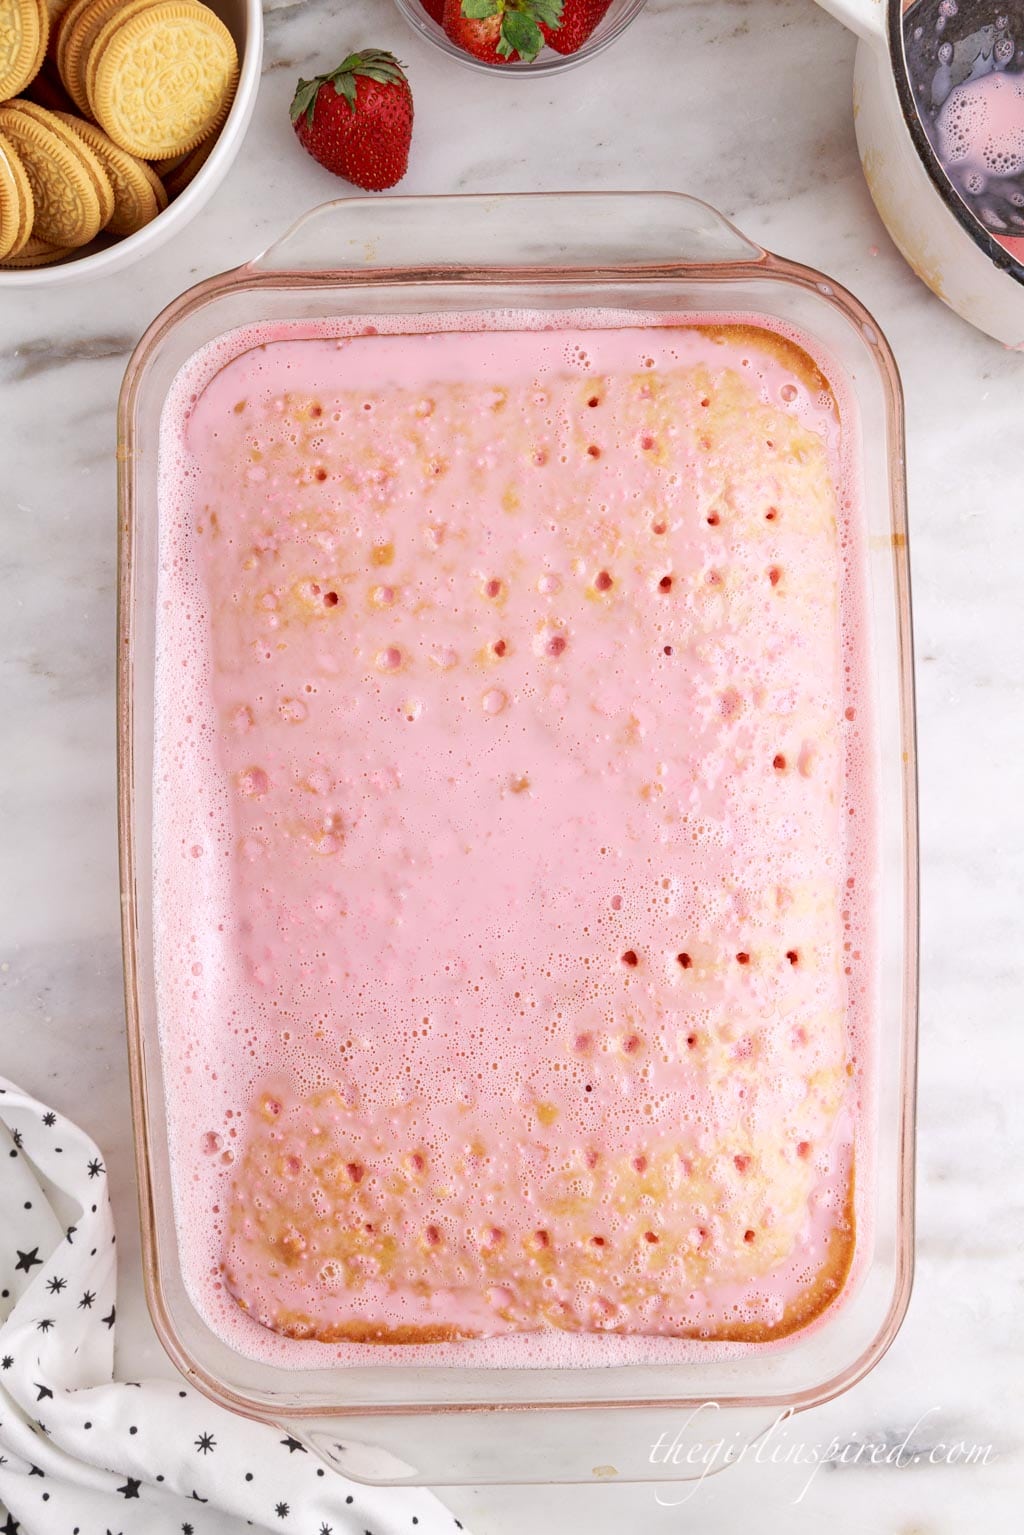 layer of strawberry jello mixture seeping into the holes in the cake.